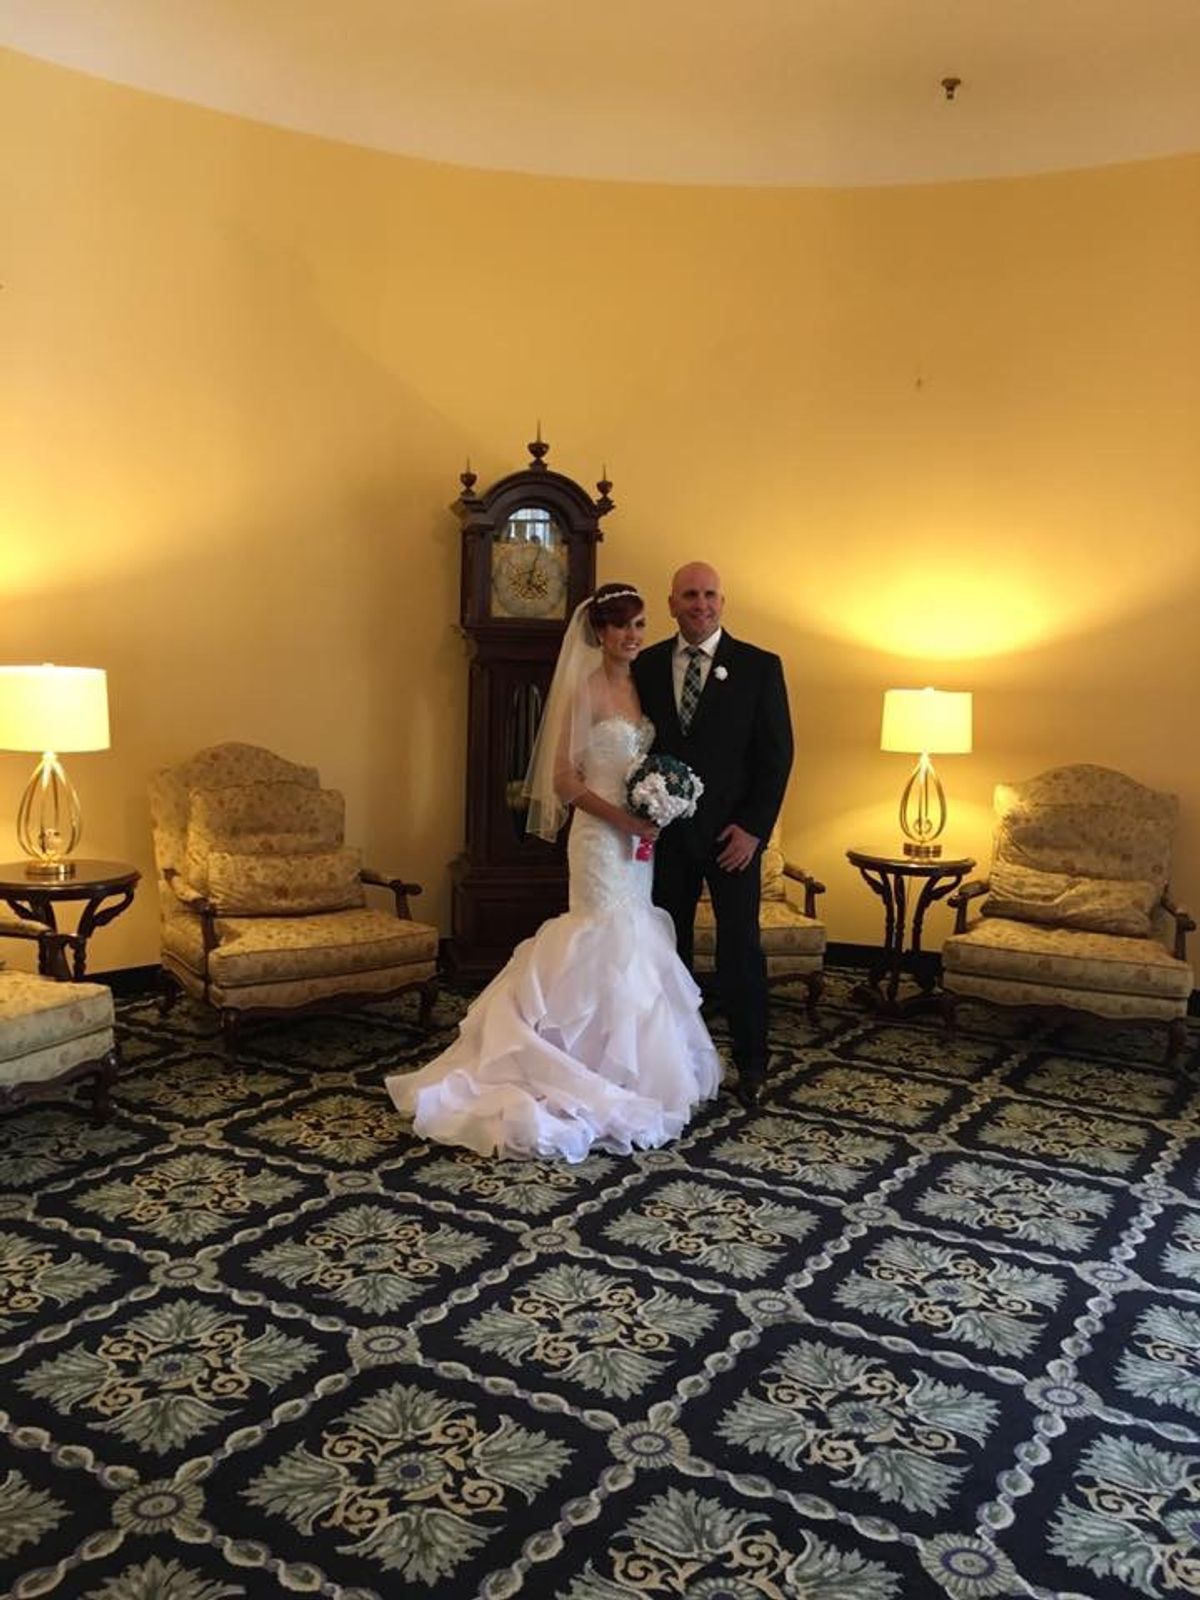 An Open Letter To My Dad After My Wedding